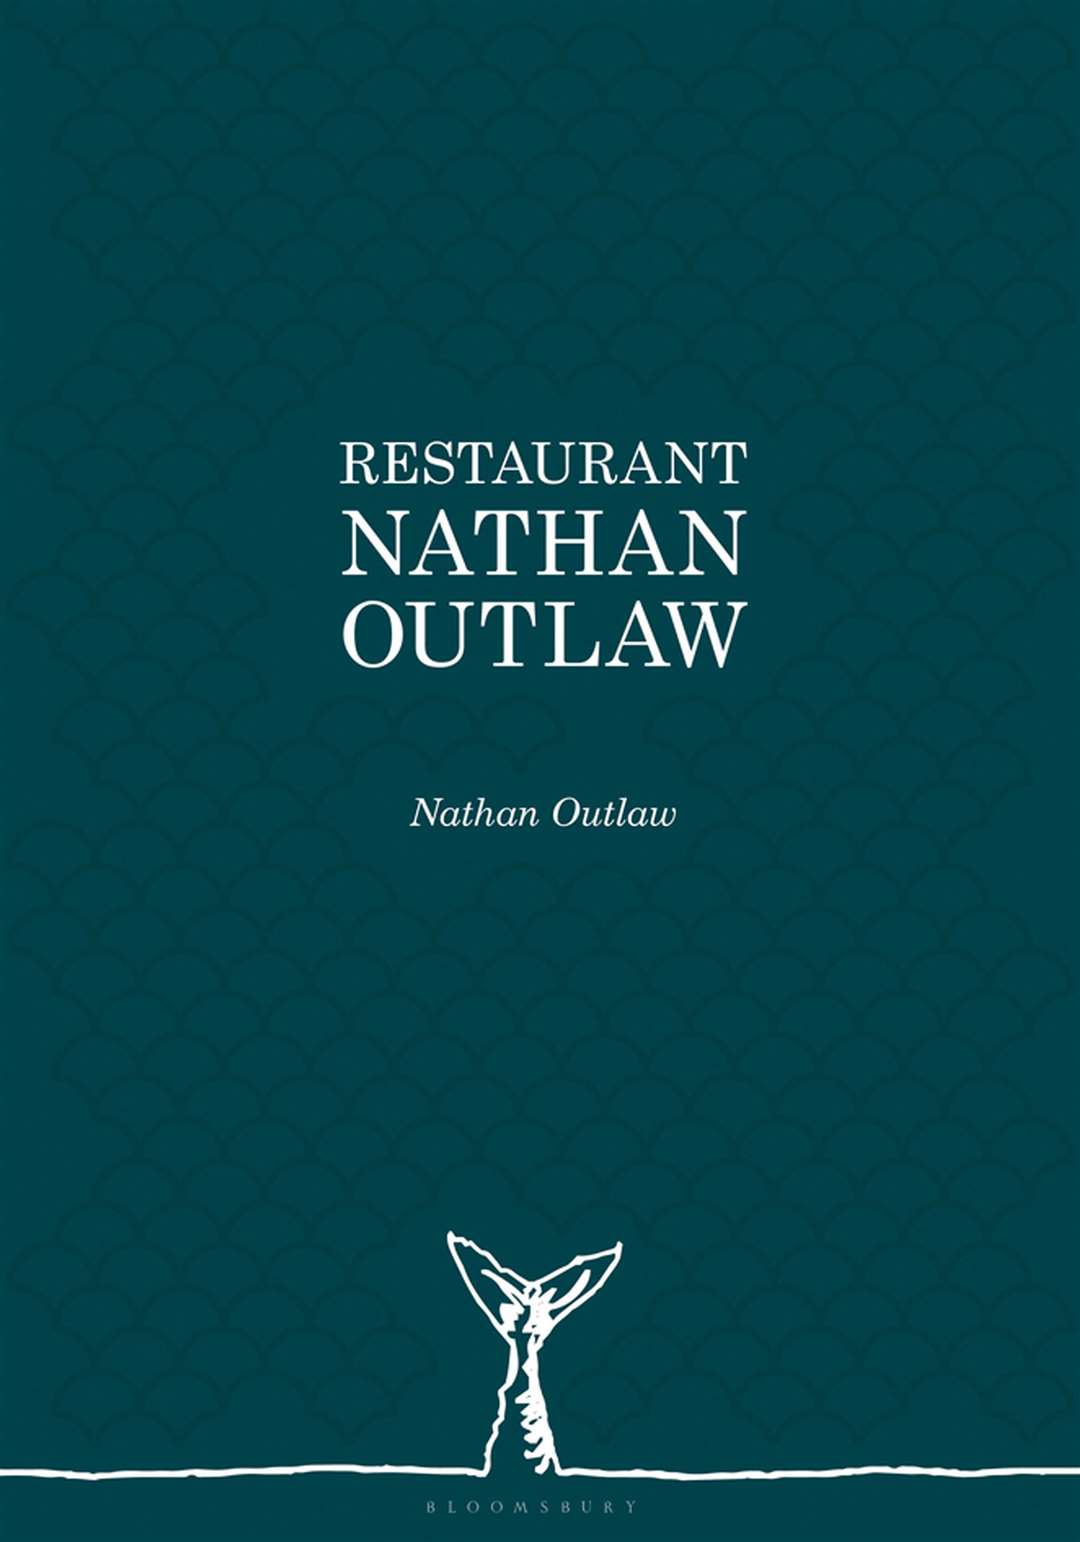 Restaurant Nathan Outlaw by Nathan Outlaw, prices £45. Available now. Picture: PA Photo/David Loftus